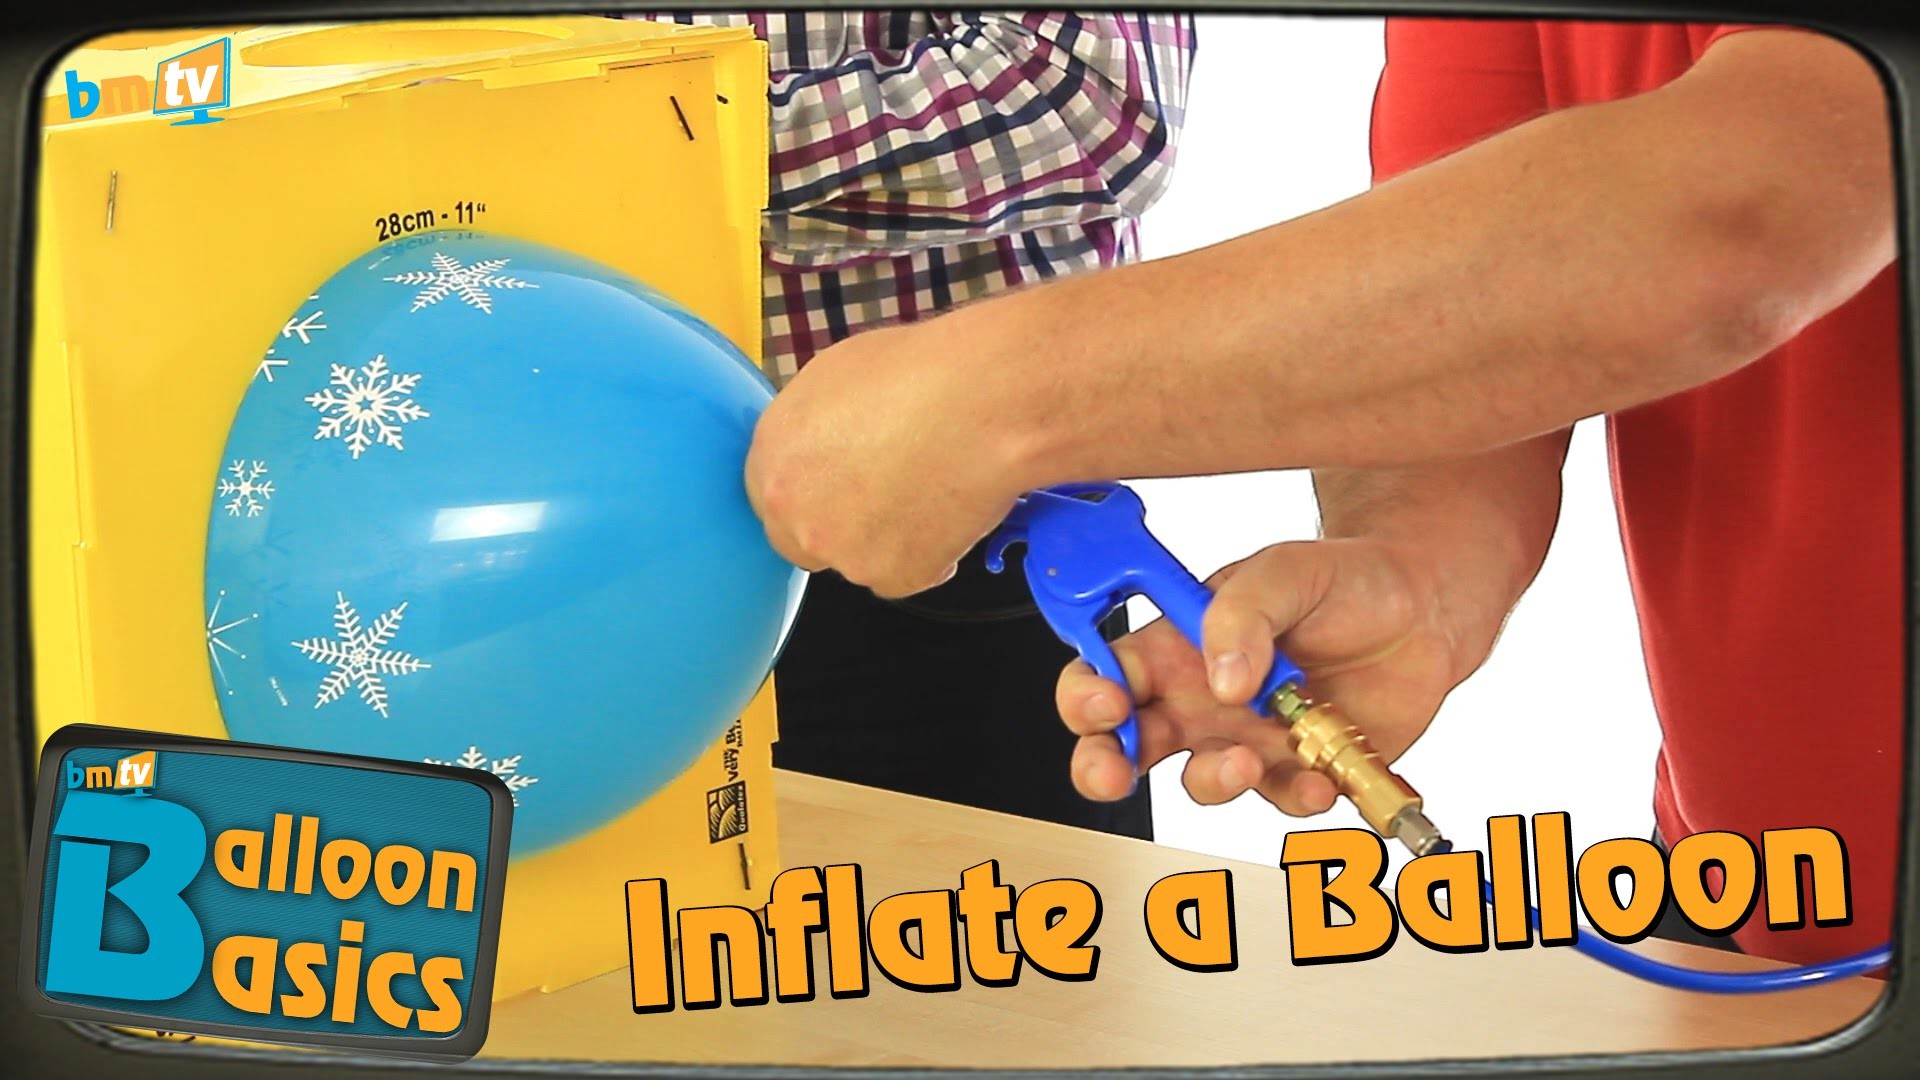 How,to,Inflate,a,Latex,Balloon,&,Tie,with,Ribbon,Balloon,Basics,03,...